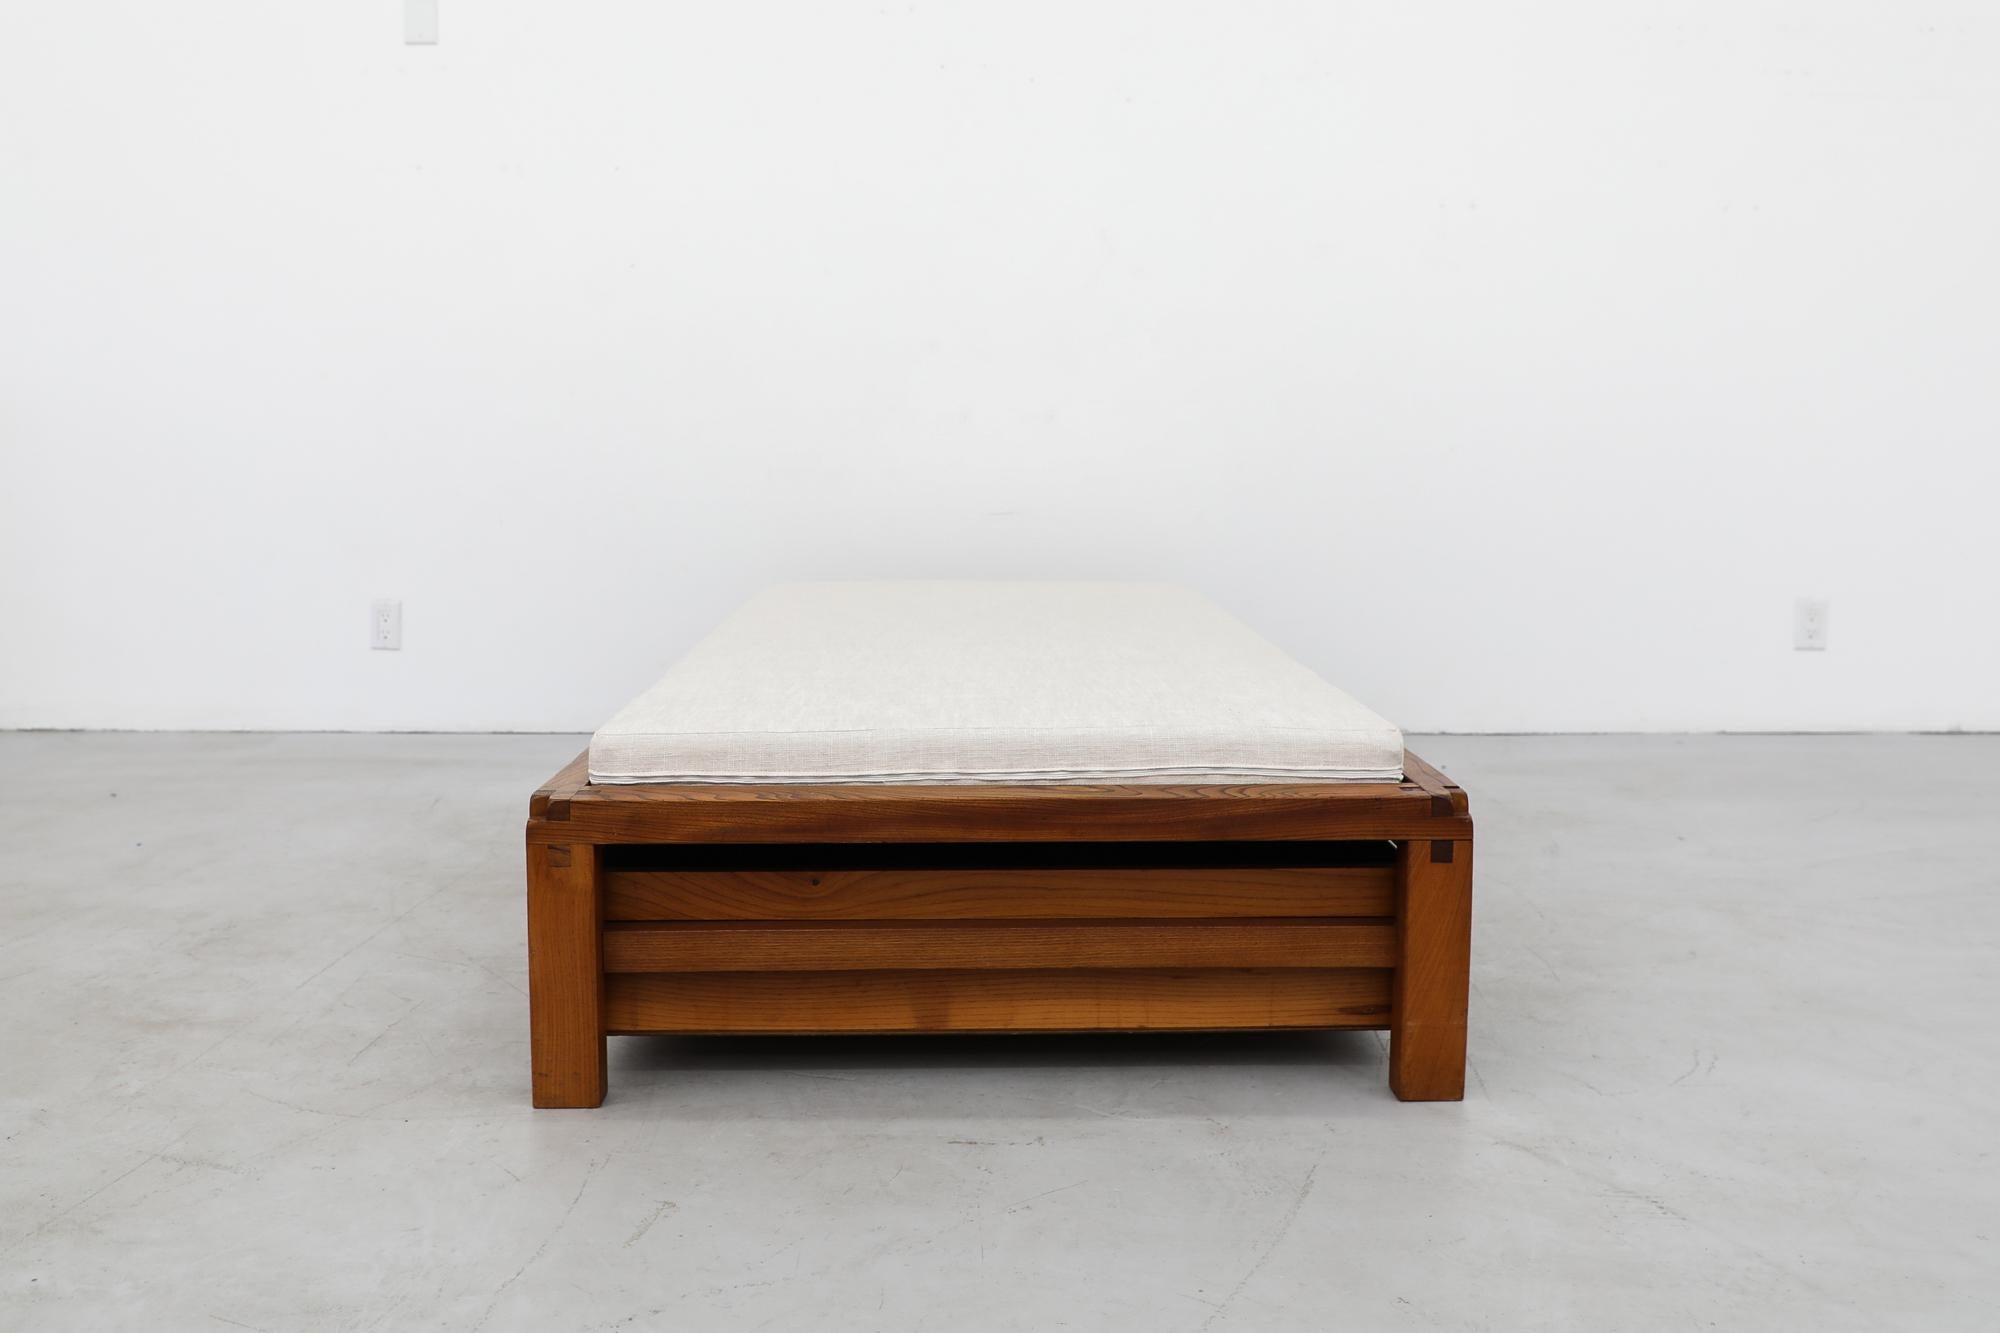 Pierre Chapo 'L03' Daybed in Elm with Storage & Newly Made Mattress, 1960s For Sale 1